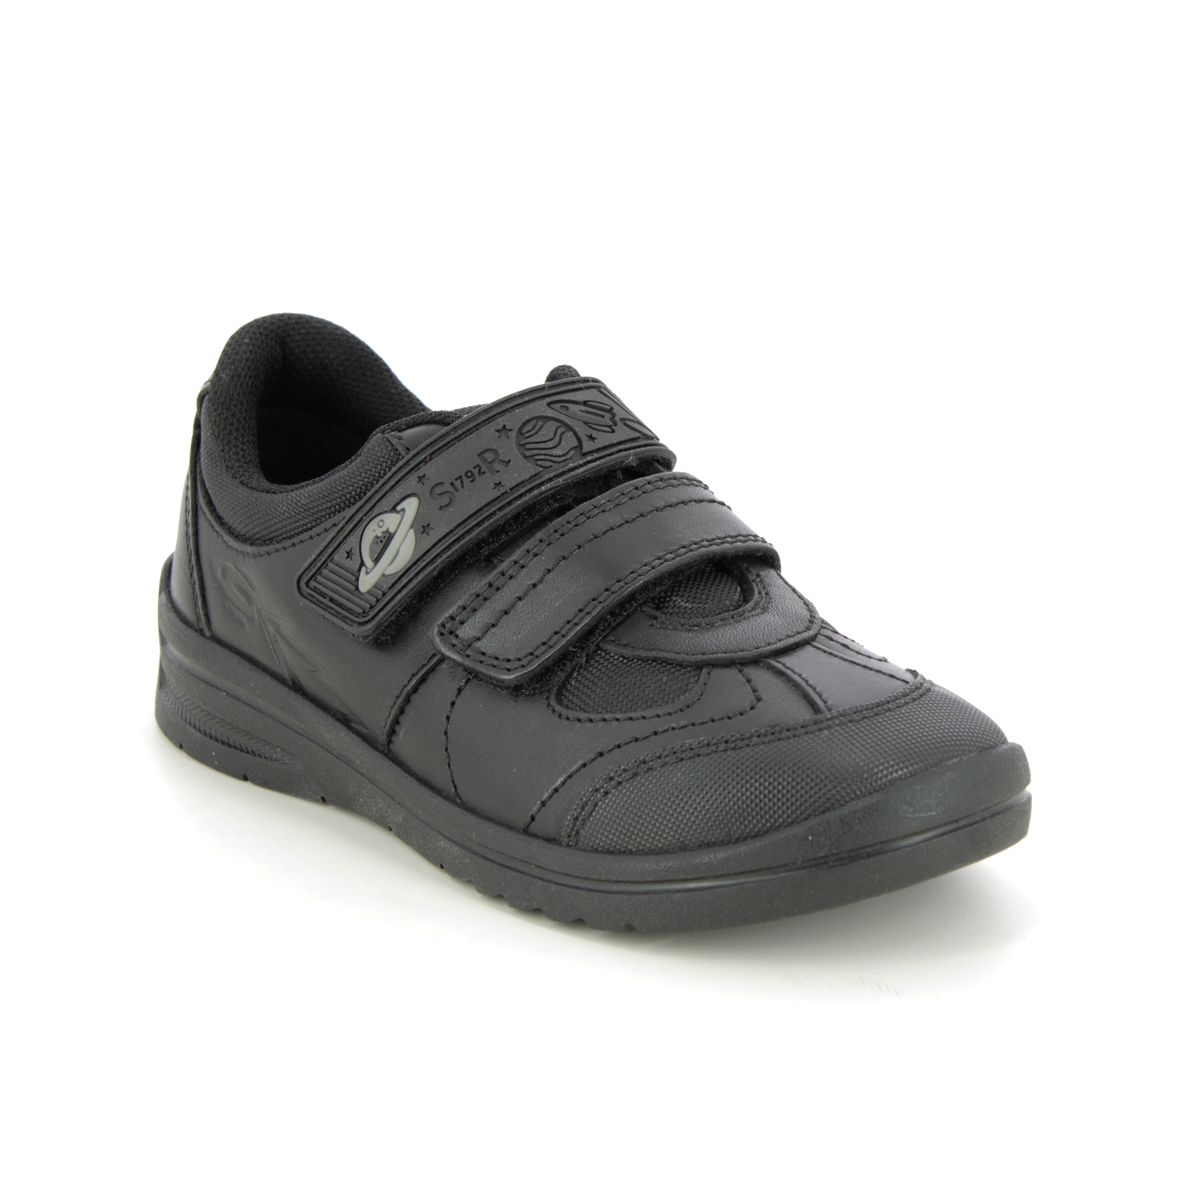 Start Rite - Rocket 2V In Black Leather 2797-75E In Size 3.5 In Plain Black Leather For School Boys Shoes  In Black Leather For kids